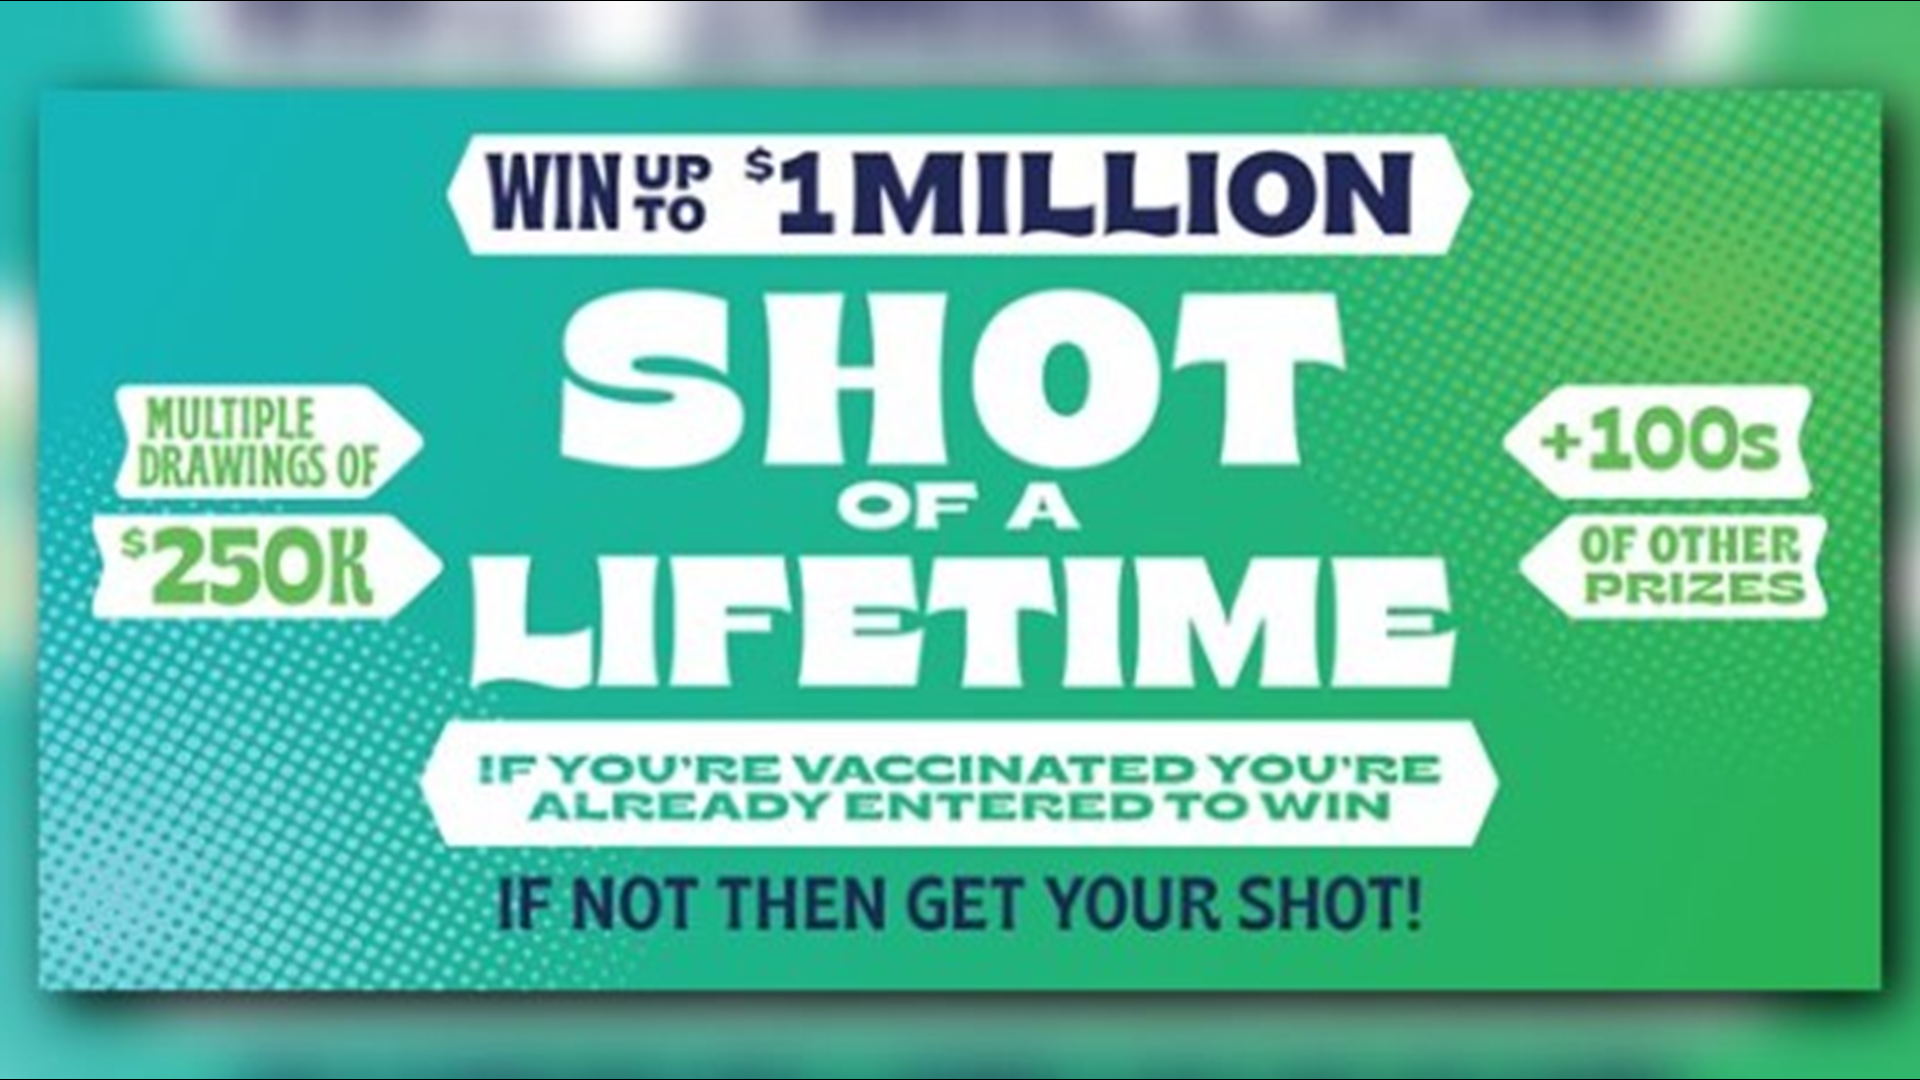 All vaccinated Washington residents are eligible for the lottery with prizes worth up to $1 million.